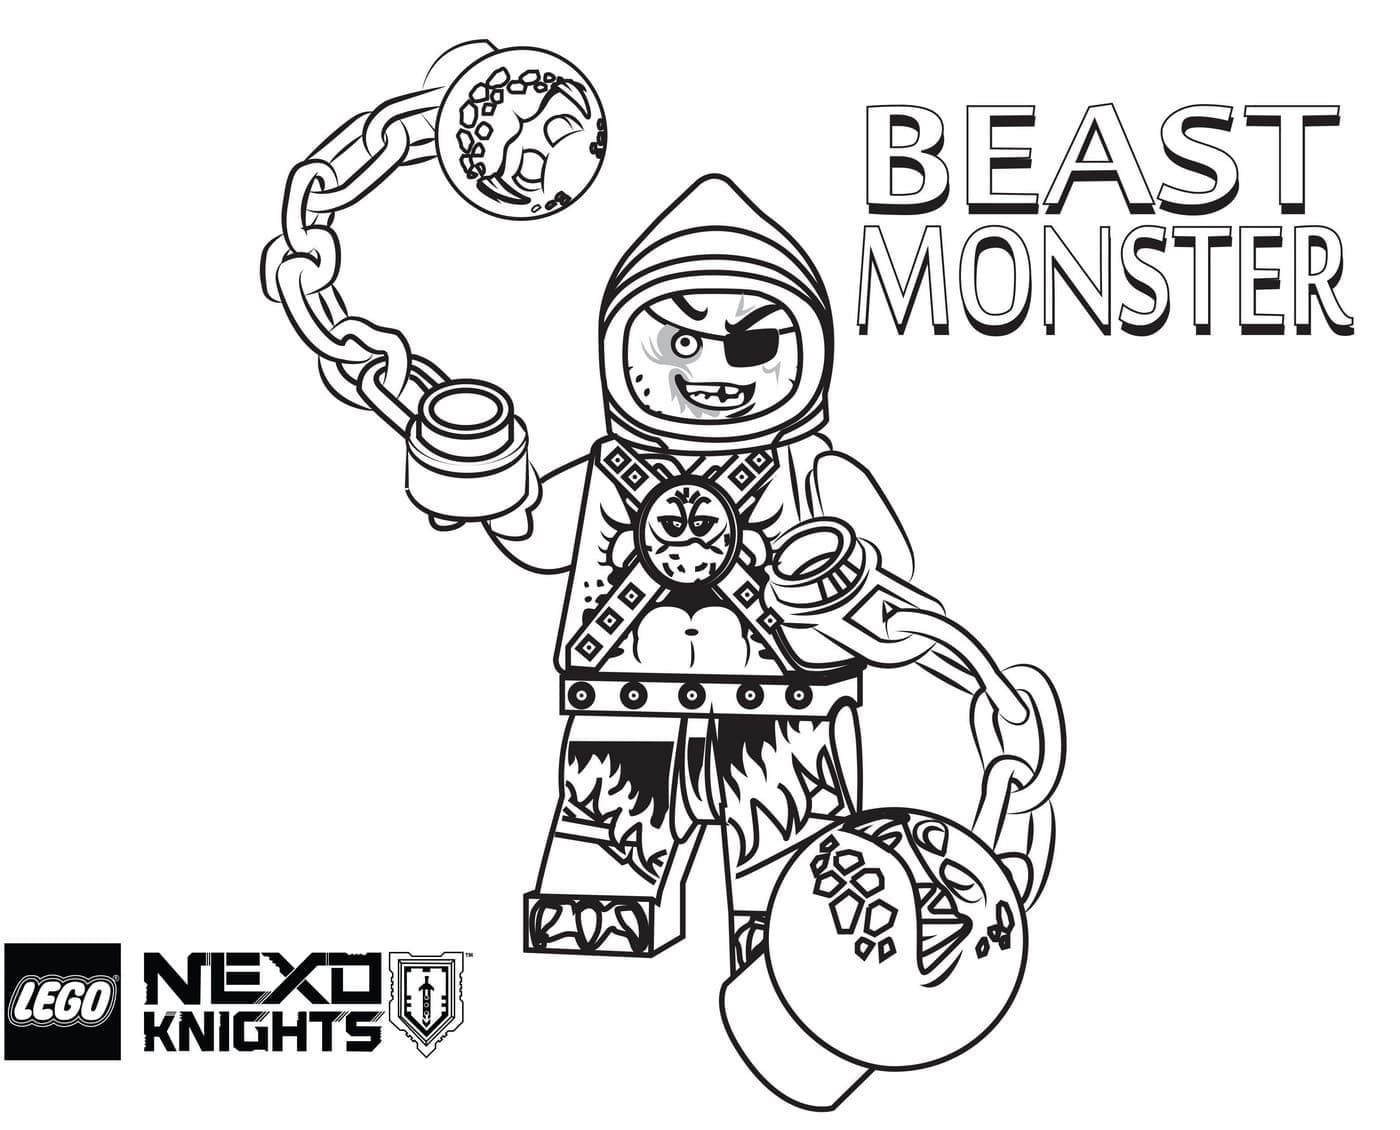 Lego Nexo Knights Beast Monster coloring page